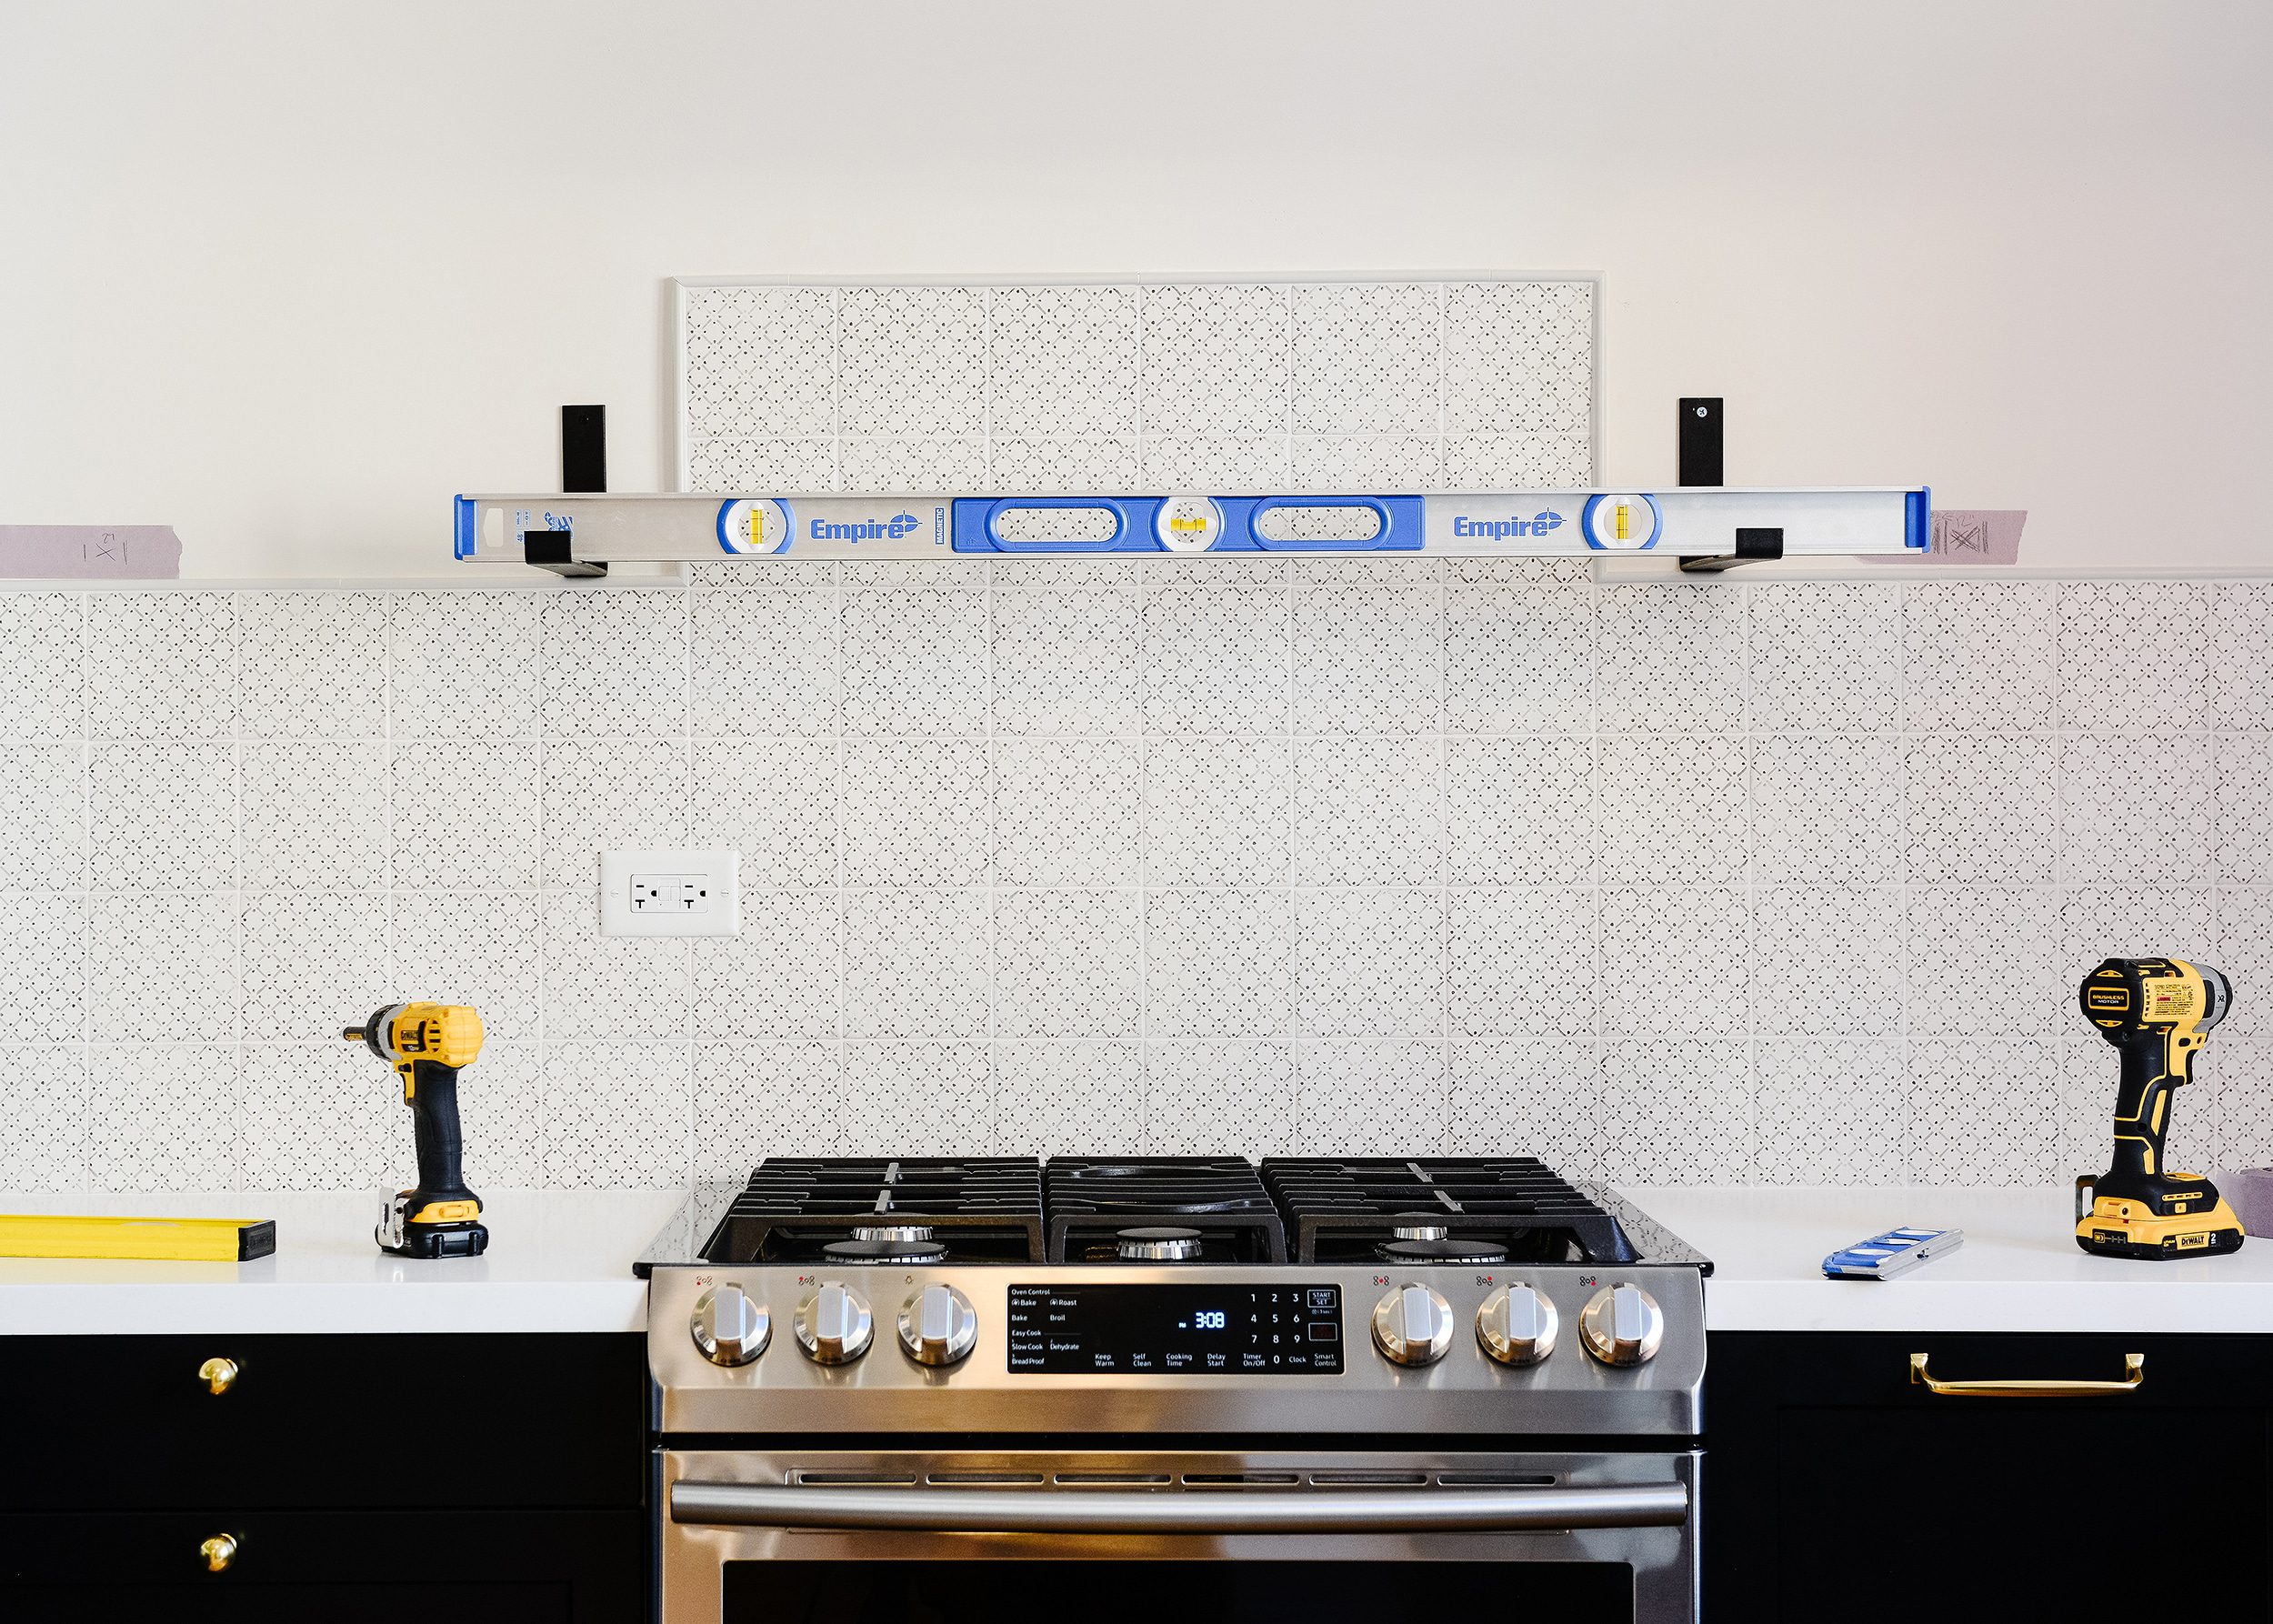 Leveling and securing metal brackets to the walls using toggle bolts for extra strength! via Yellow Brick Home